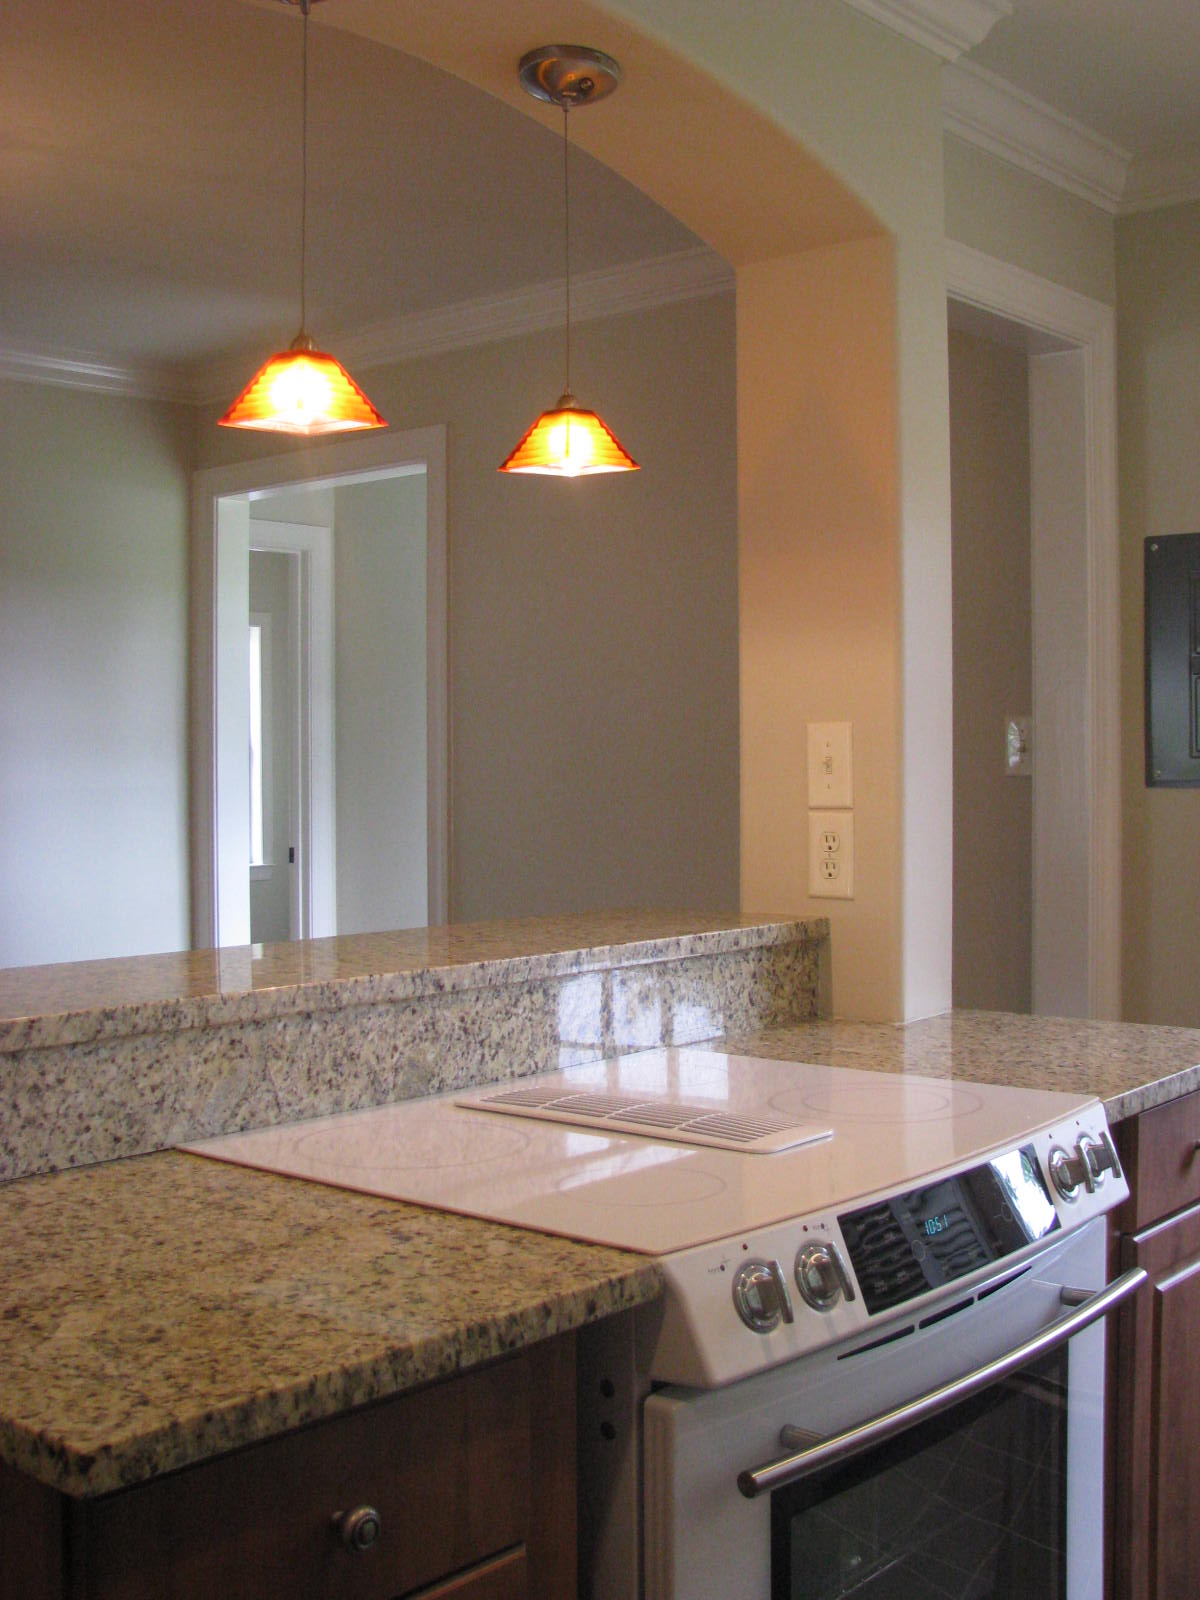 Beautiful remodeled kitchen
                            with archway over breakfast bar!